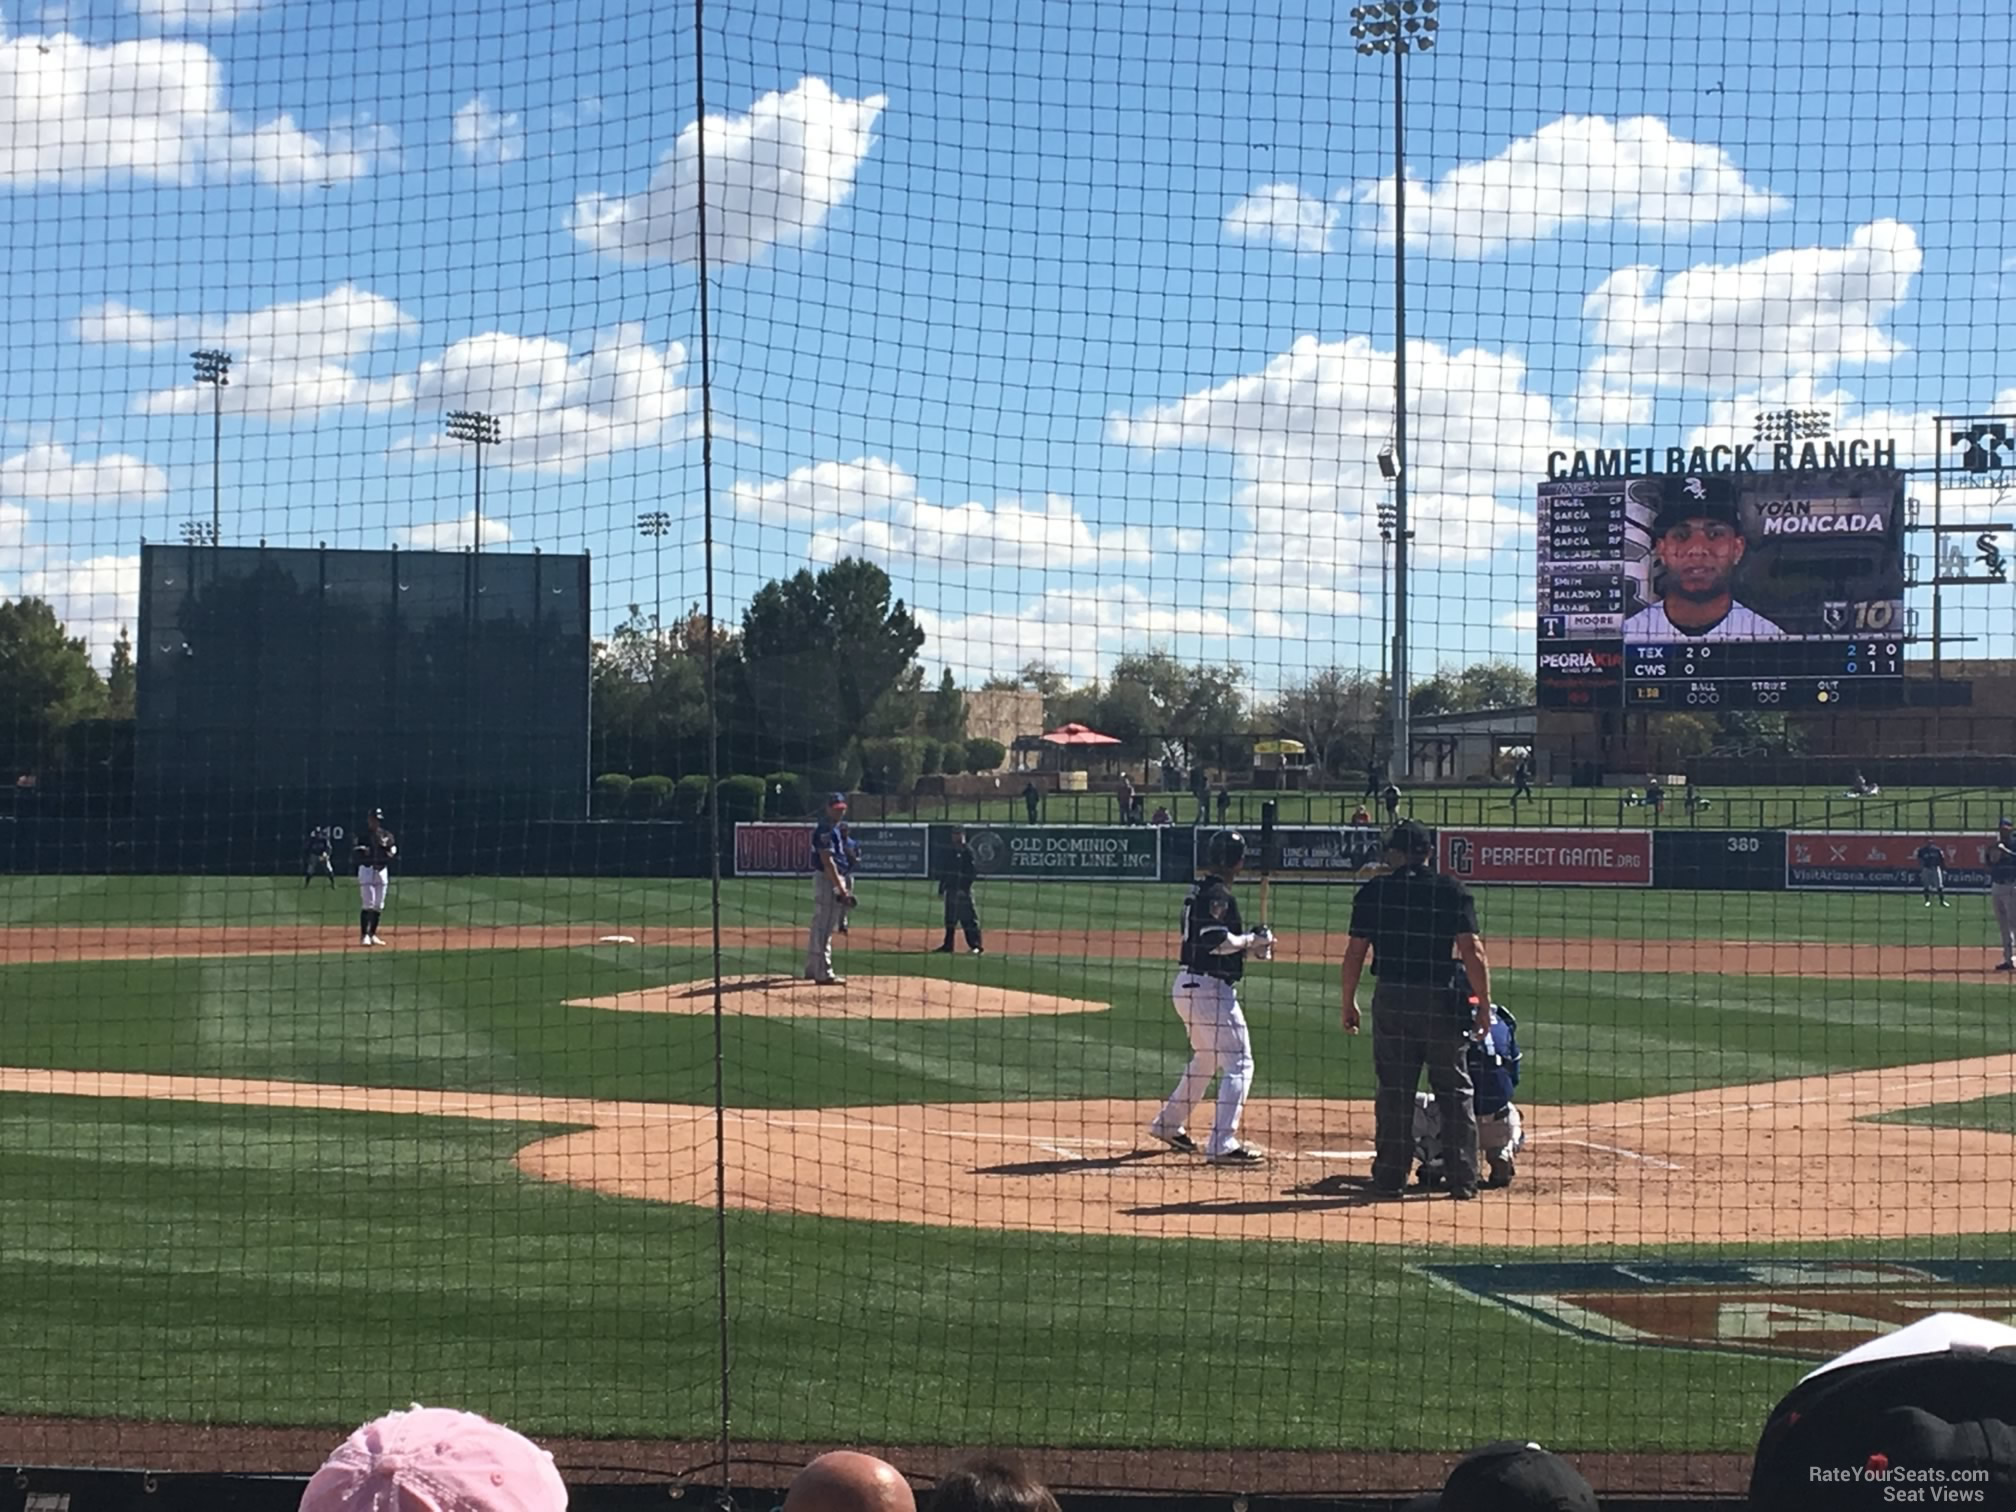 section 16, row 6 seat view  - camelback ranch